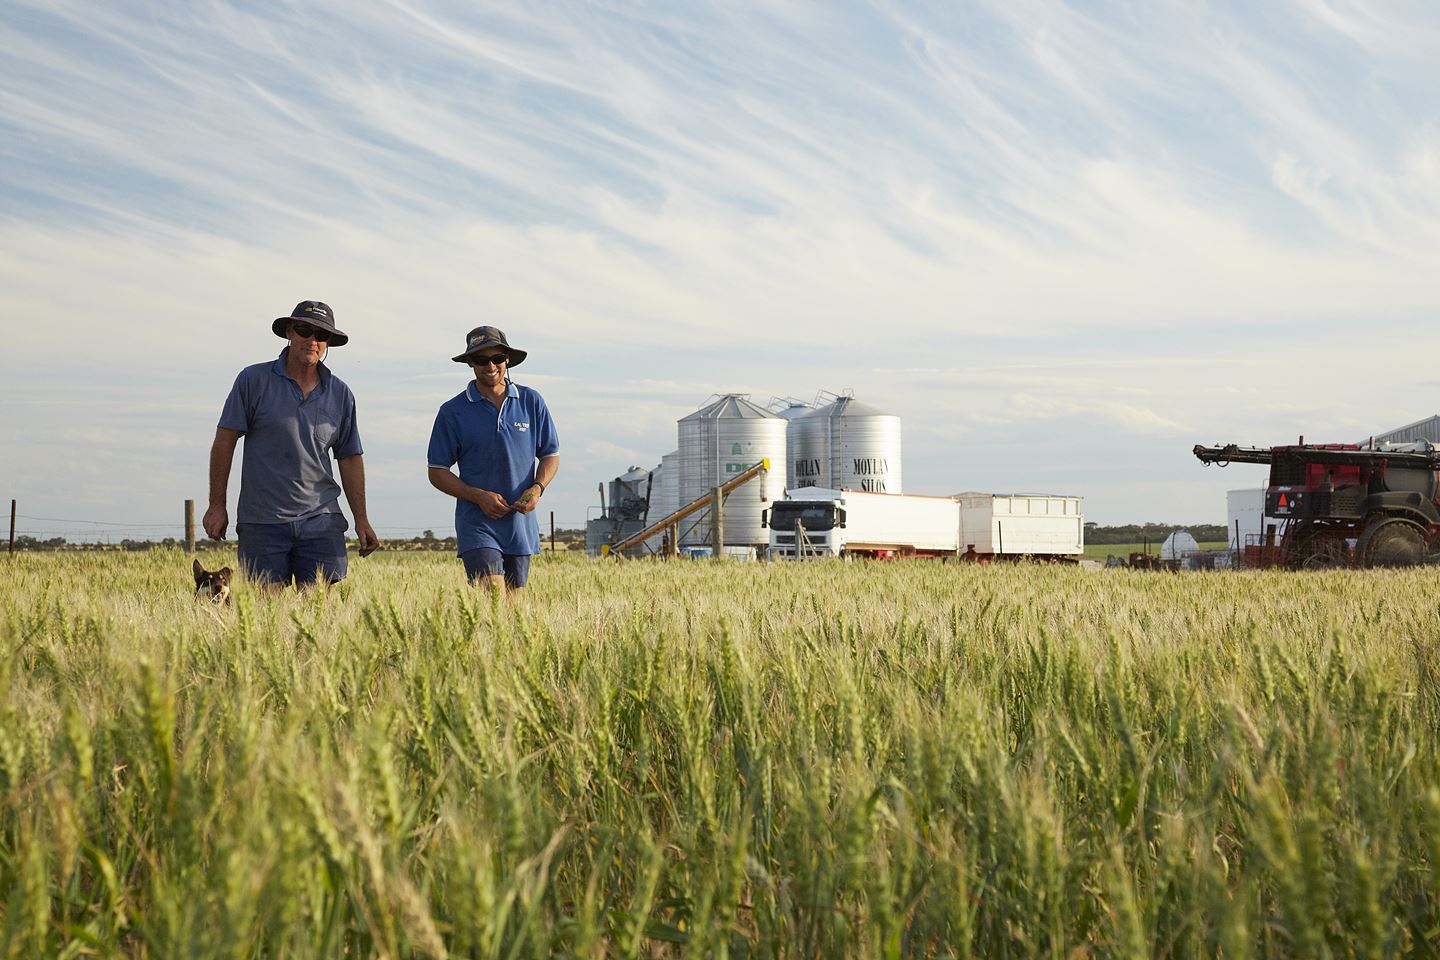 Two growers walk through a paddock of green barley with farm silos in the background